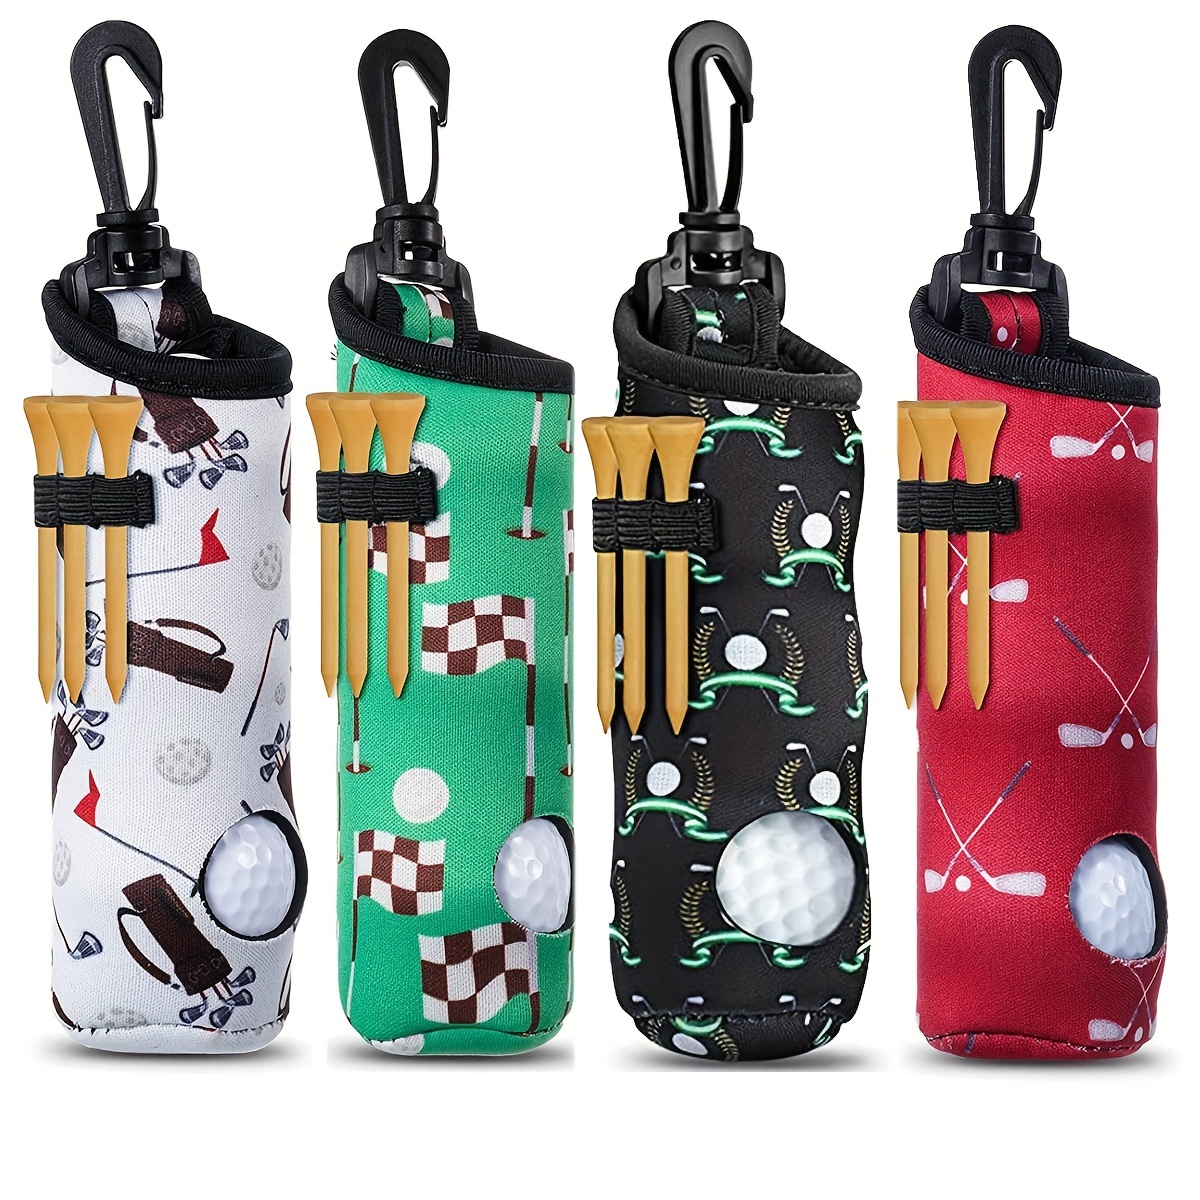 

Golfers: Get Ready To Tee Off With This 4-piece Golf Ball Storage Bag & Tee Holder!